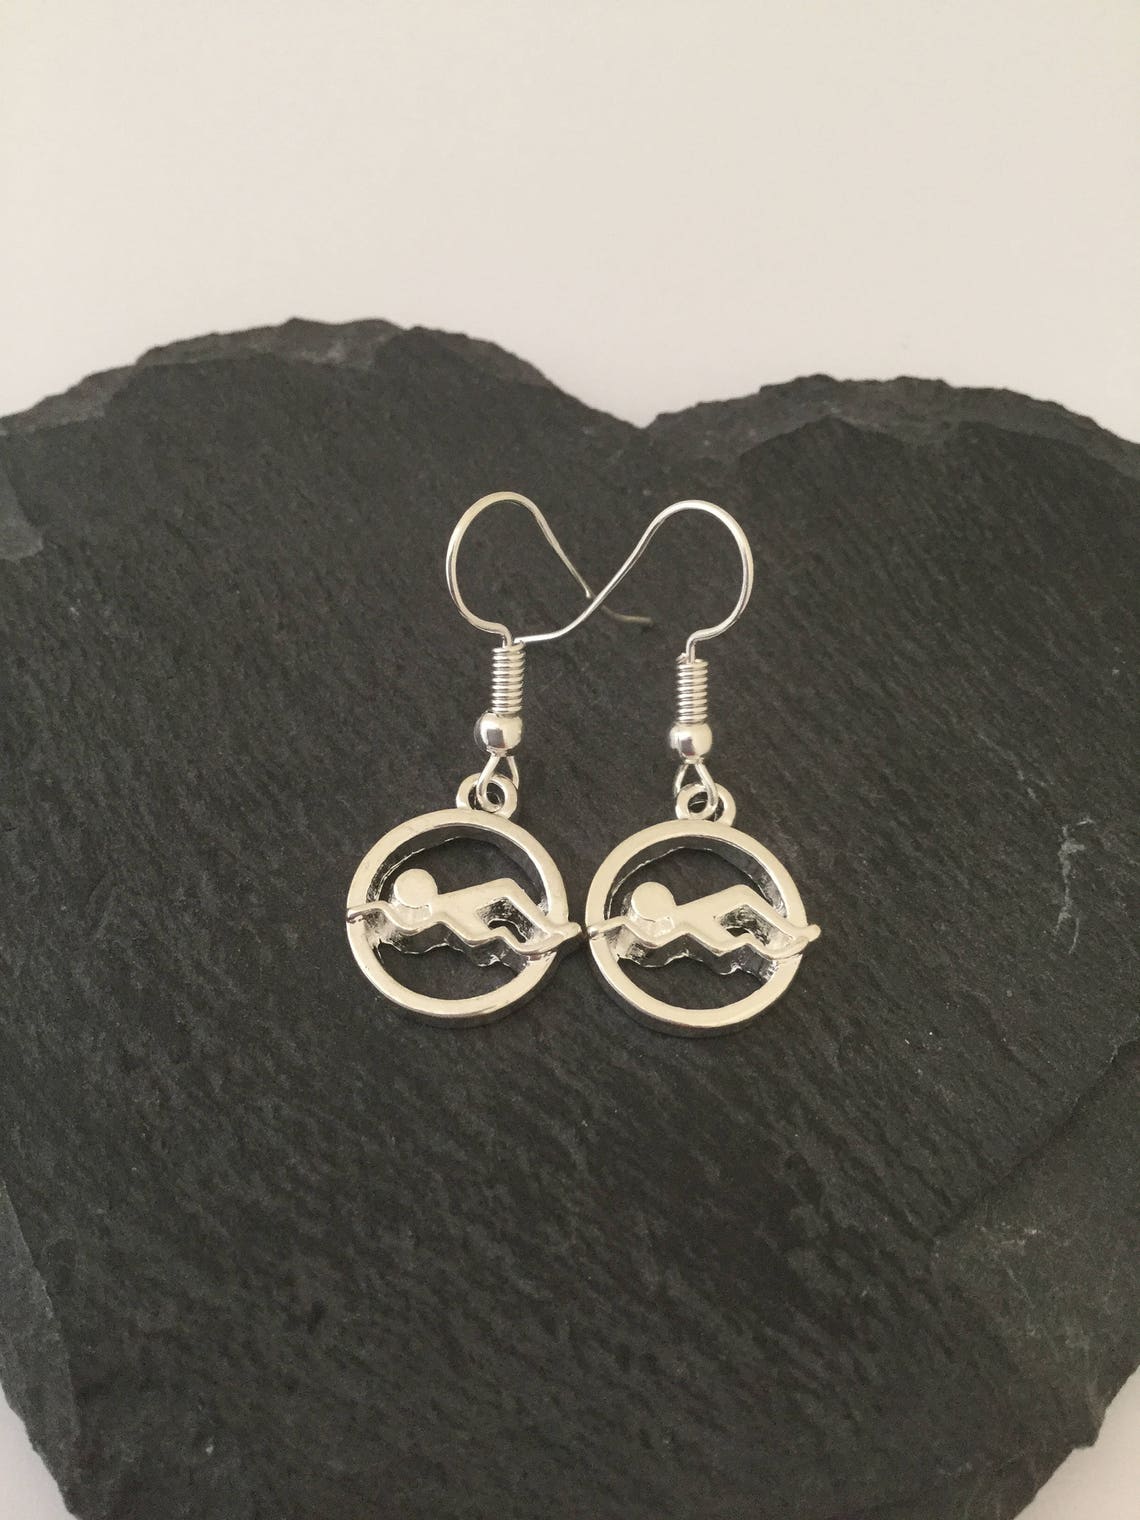 Swimming Enthusiast’s Earrings